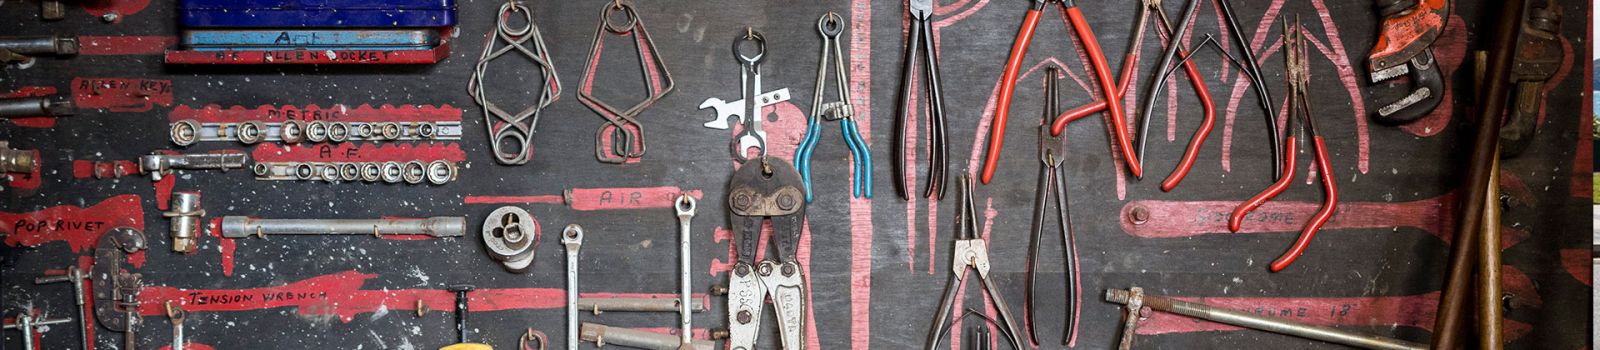 Image of builders board with tools hanging banner image